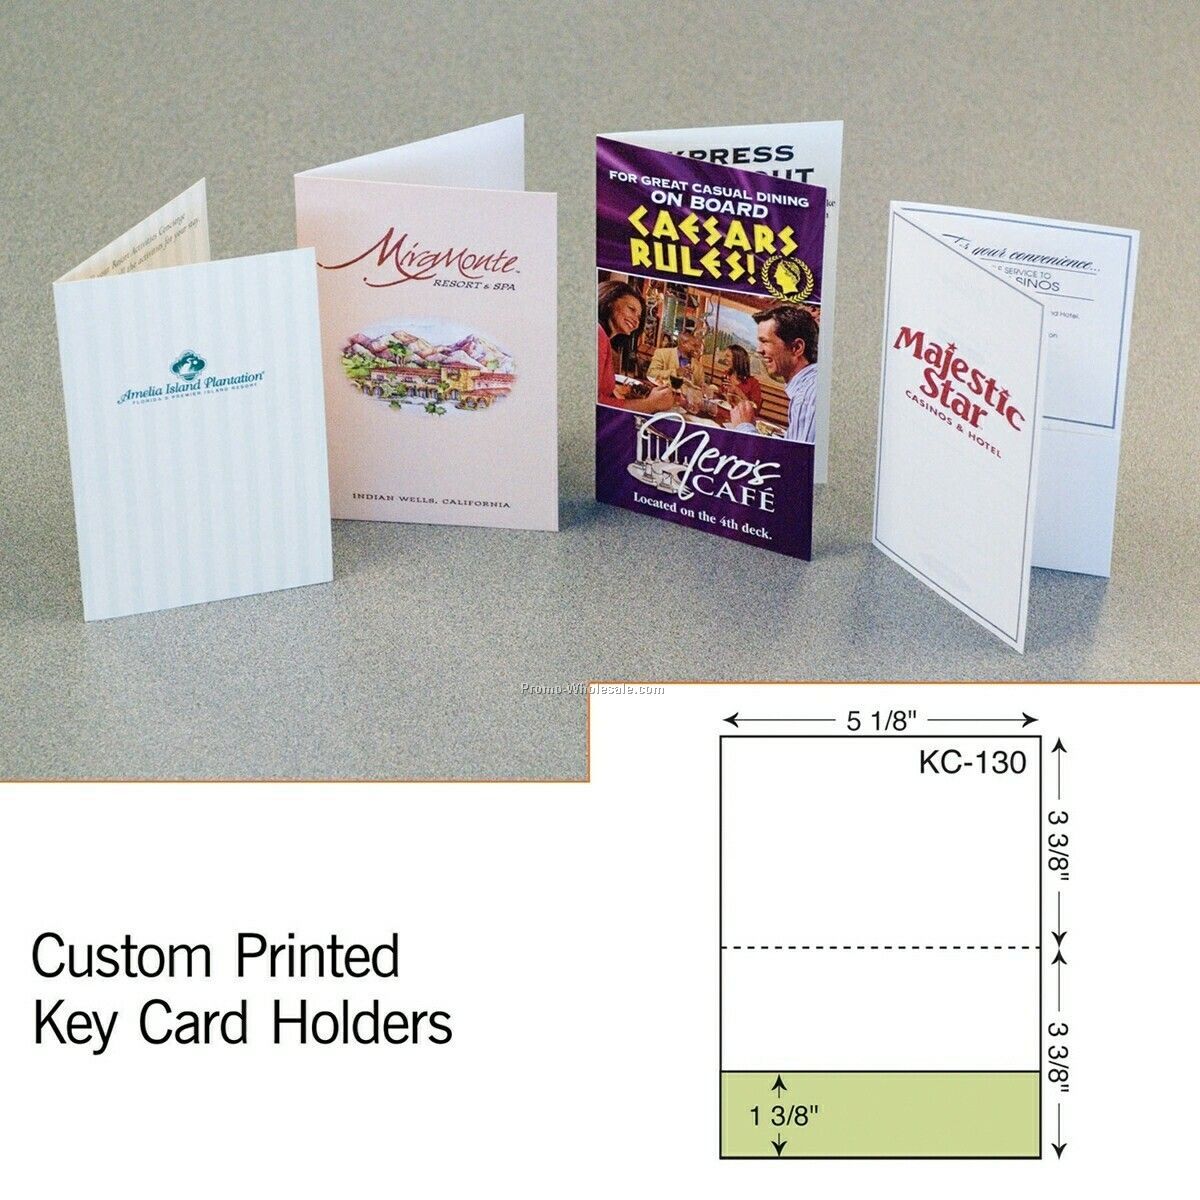 3-3/4"x2-3/4" Key Card W/ Curved Right Pocket (2 Color)